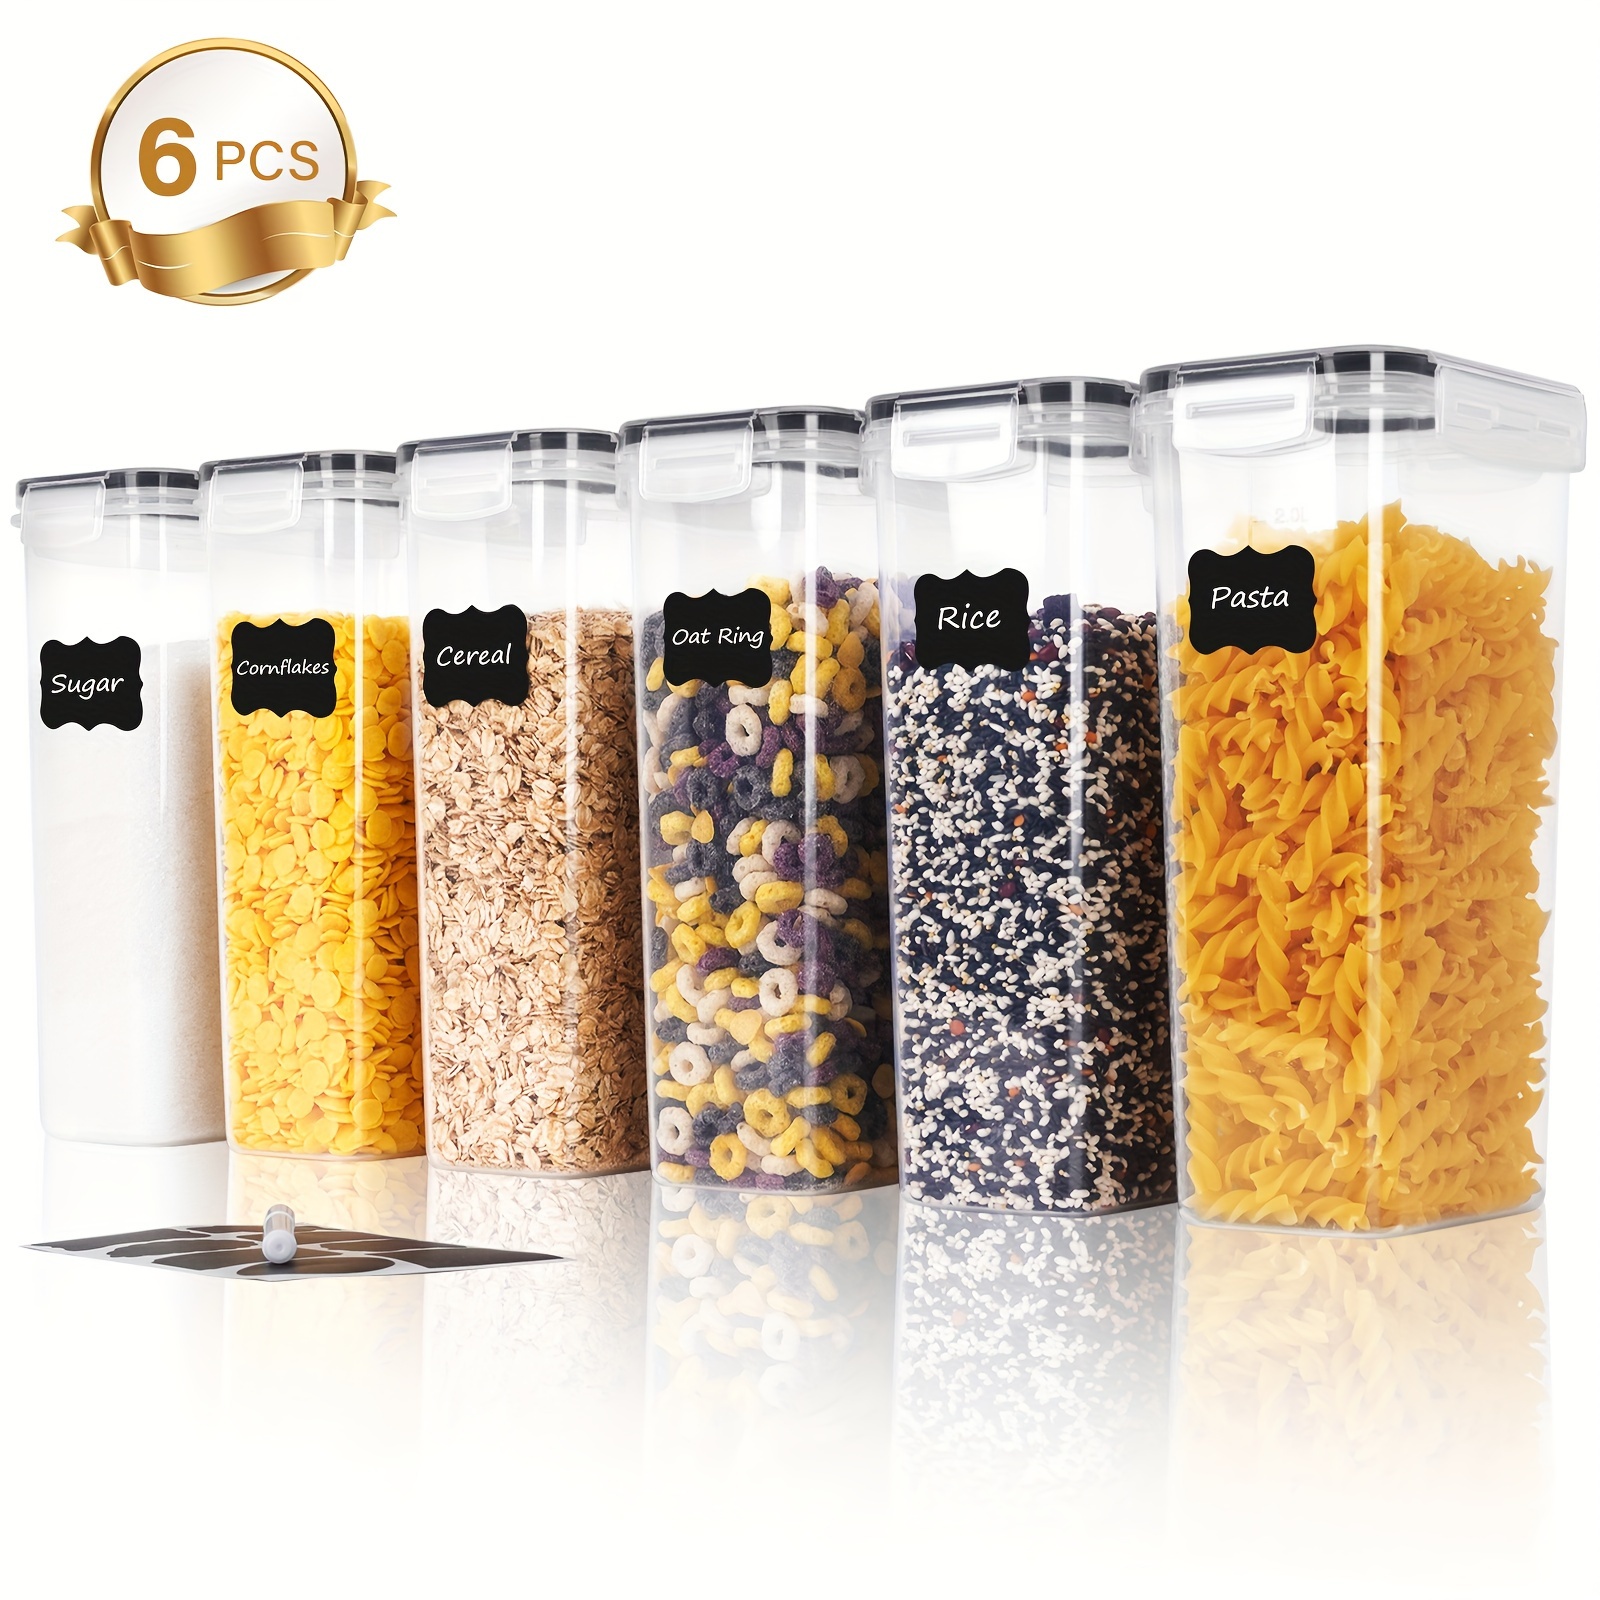 6pcs Airtight Pasta Storage Containers, 81.15oz Large Food Canisters  Organizer With Labels Marker For Flour Sugar Noodles Dry Food, BPA Free,  Black